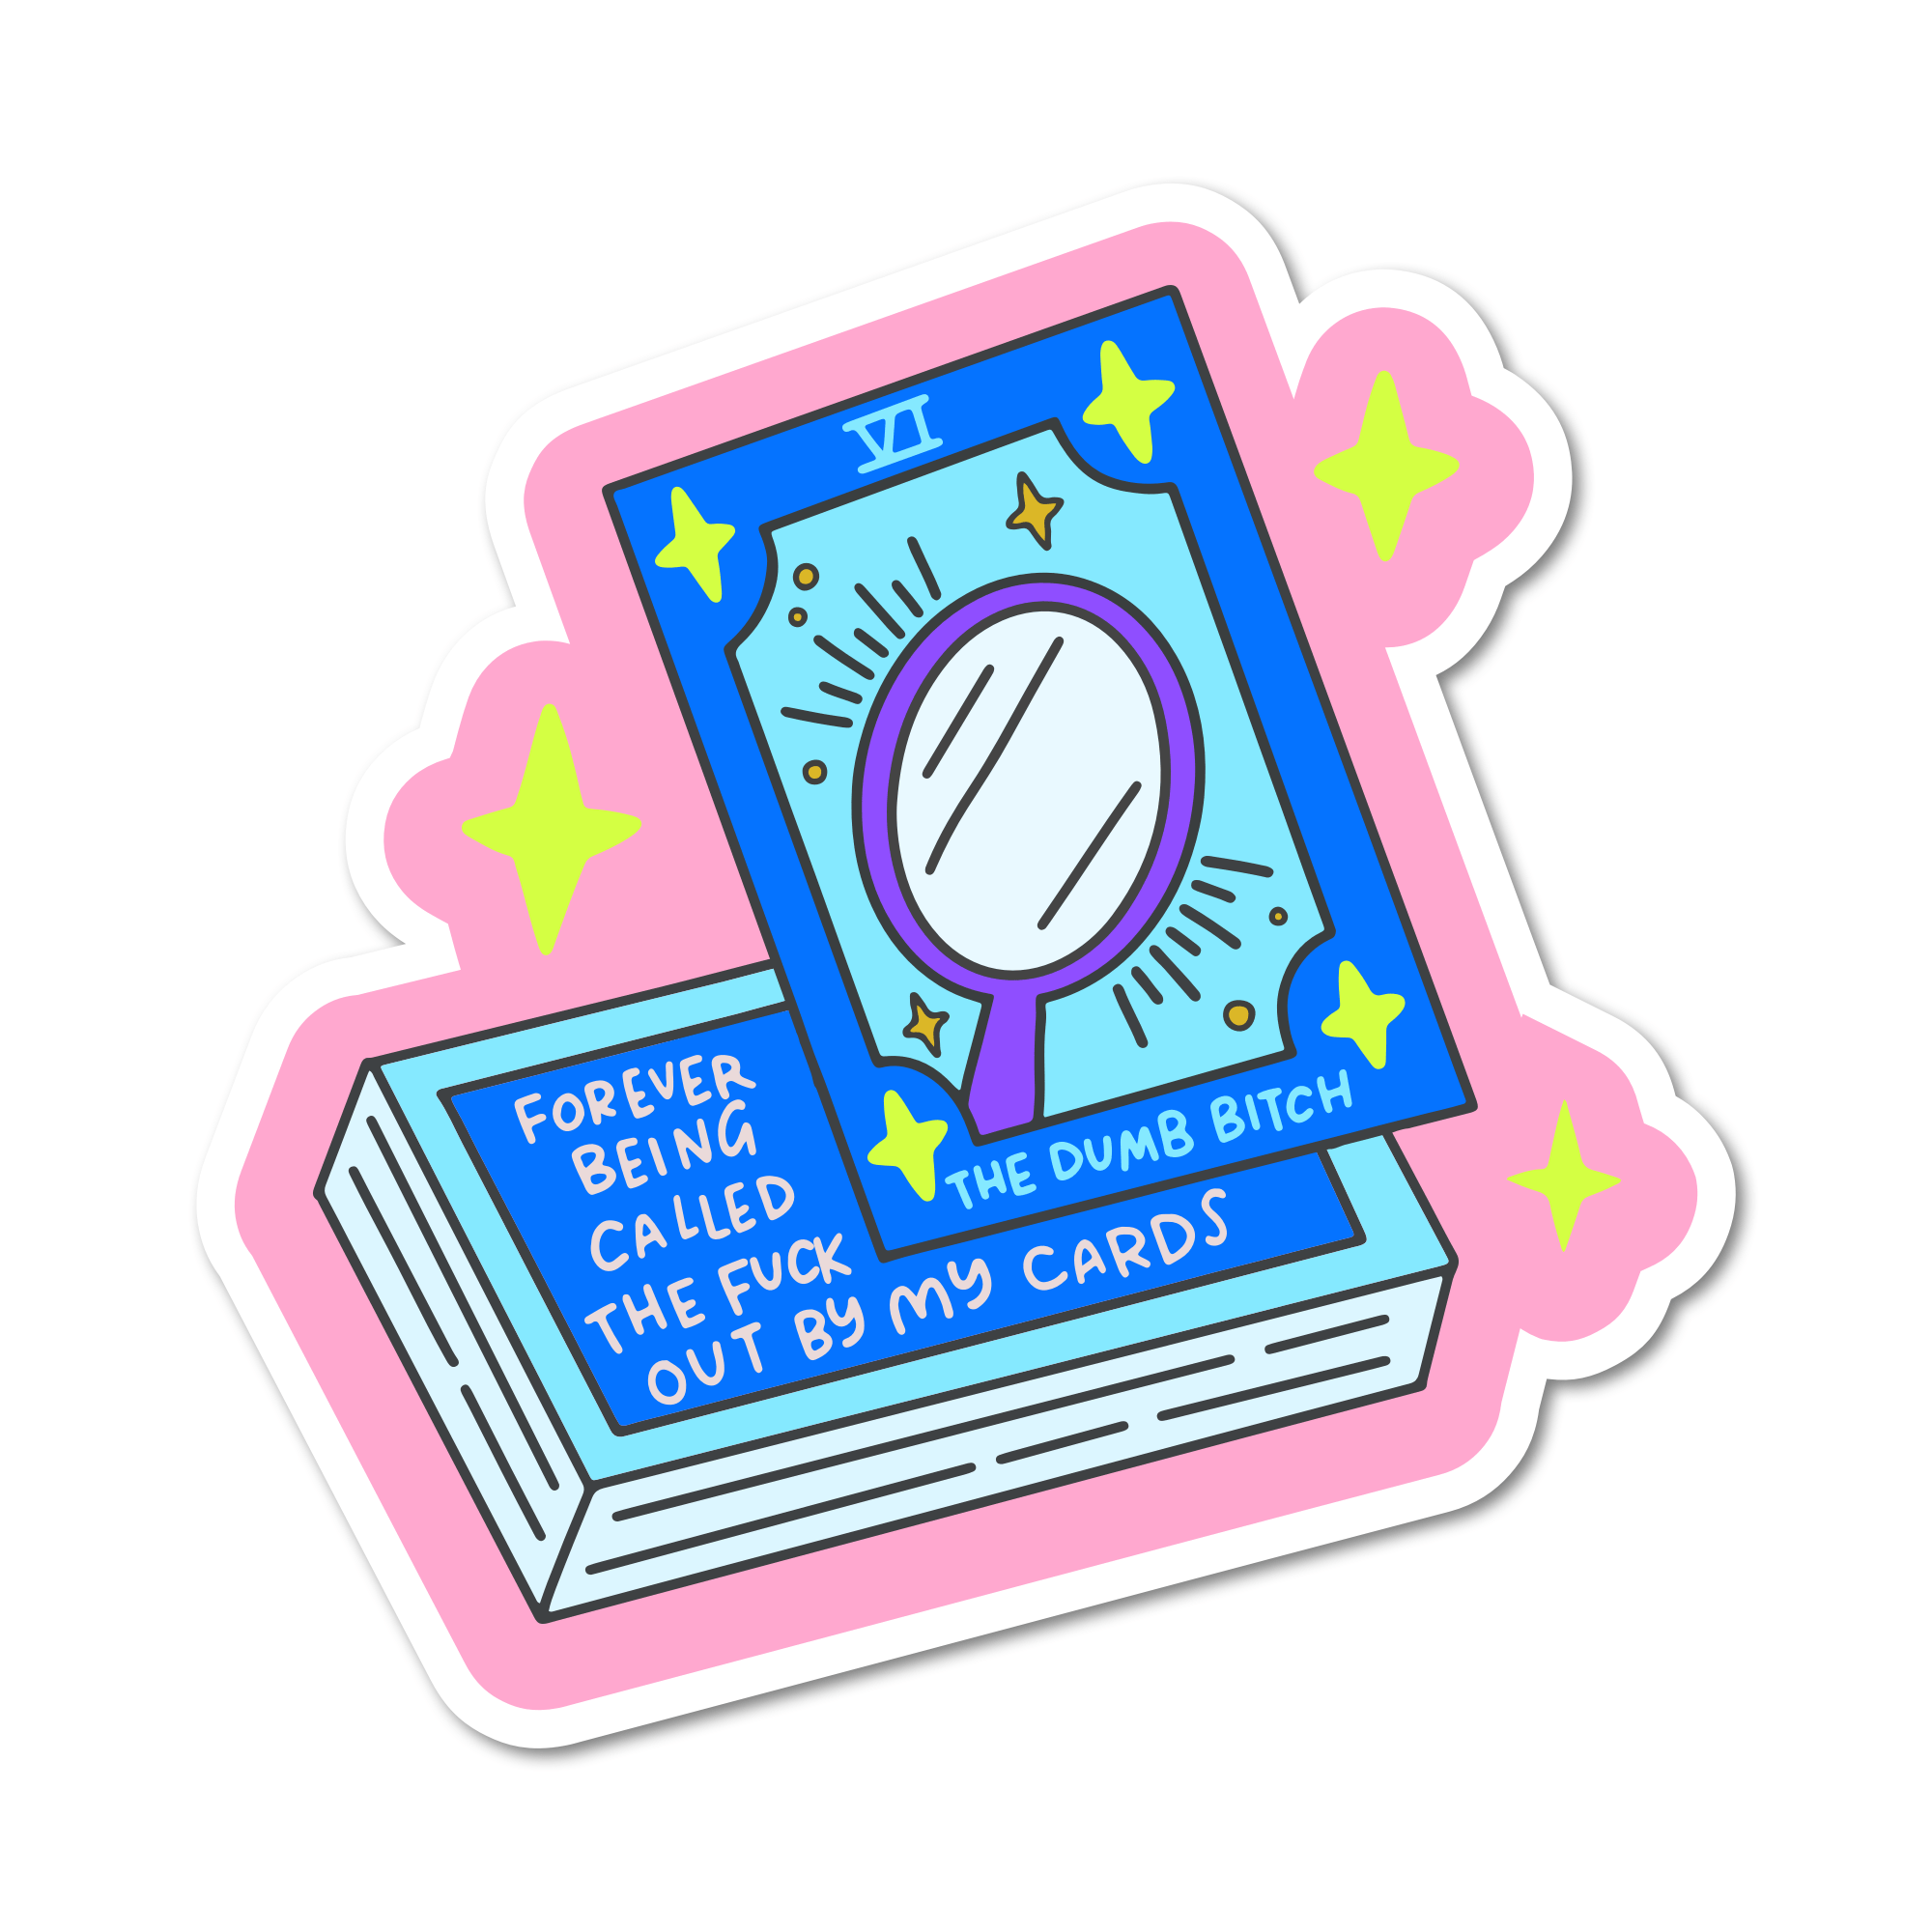 Called Out By My Cards Tarot Sticker - Spiral Circle